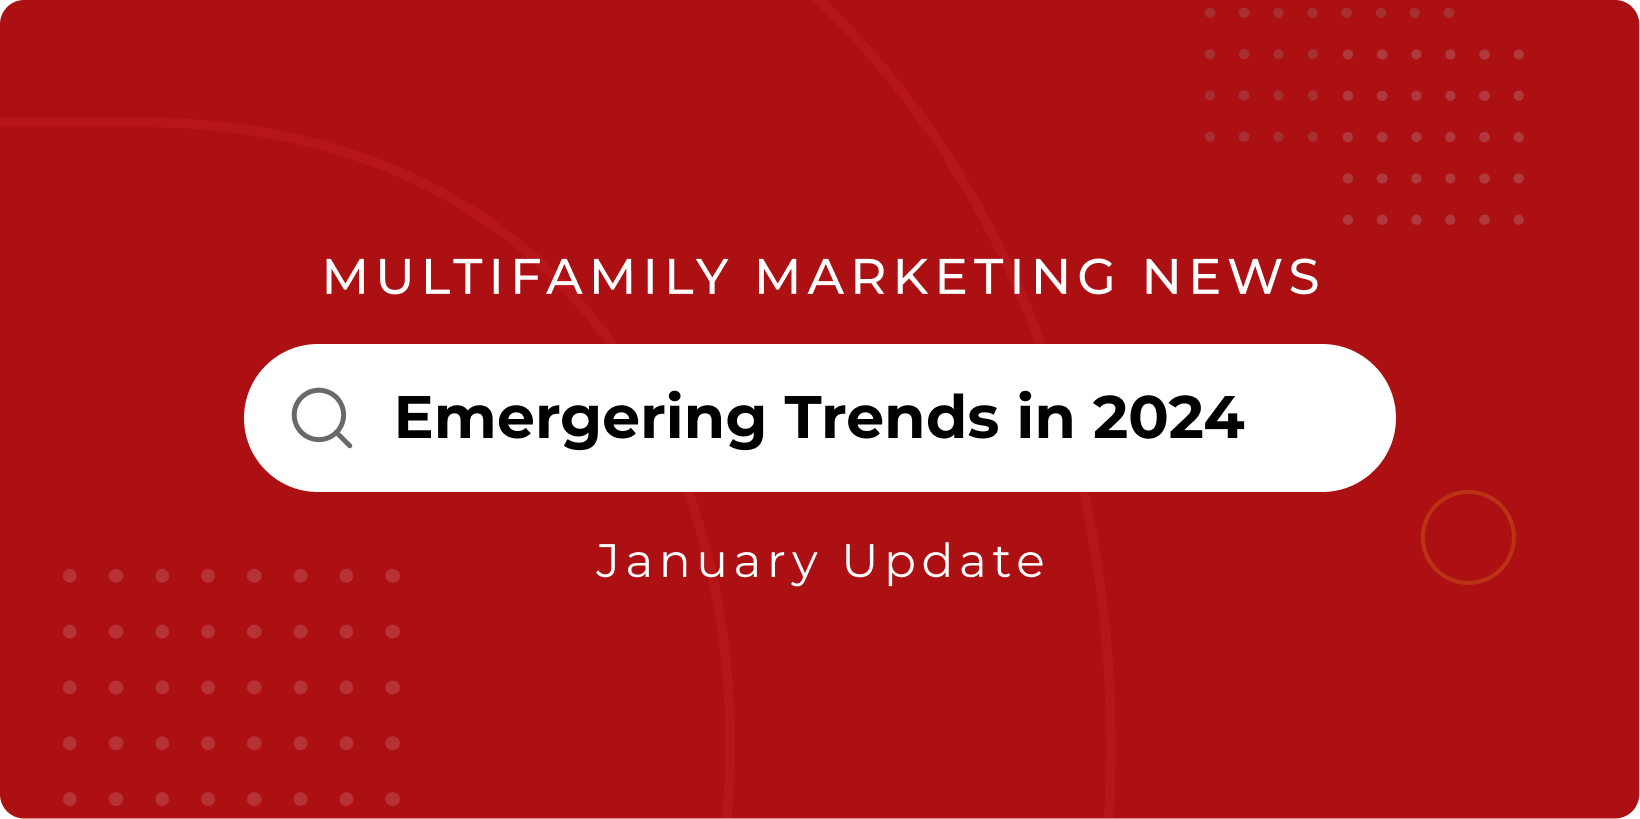 Emerging Trends in 2024 for Multifamily Marketers